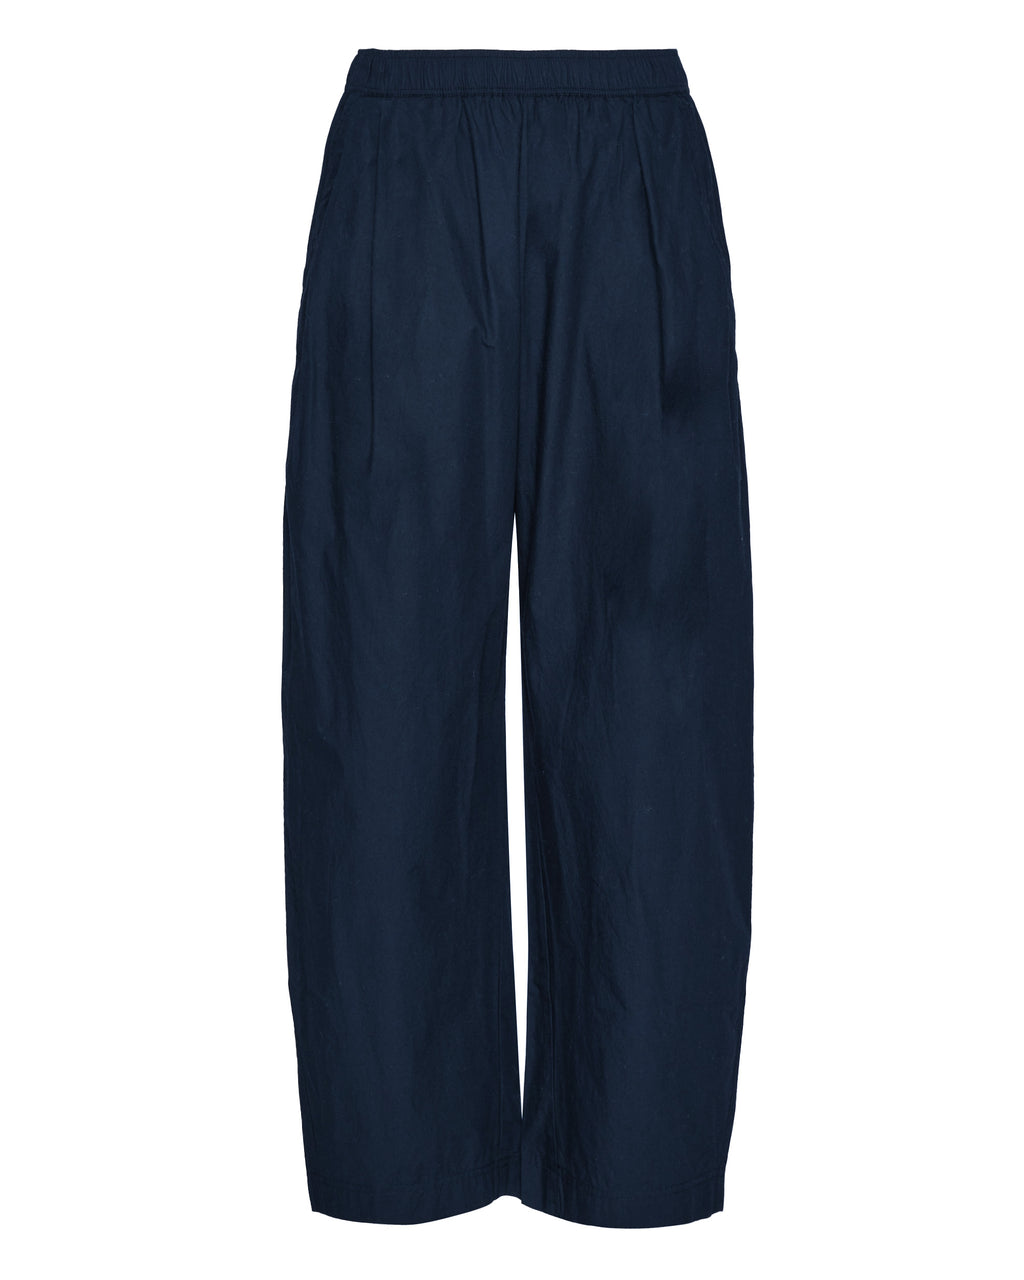 Spa Pleat Pant in Navy